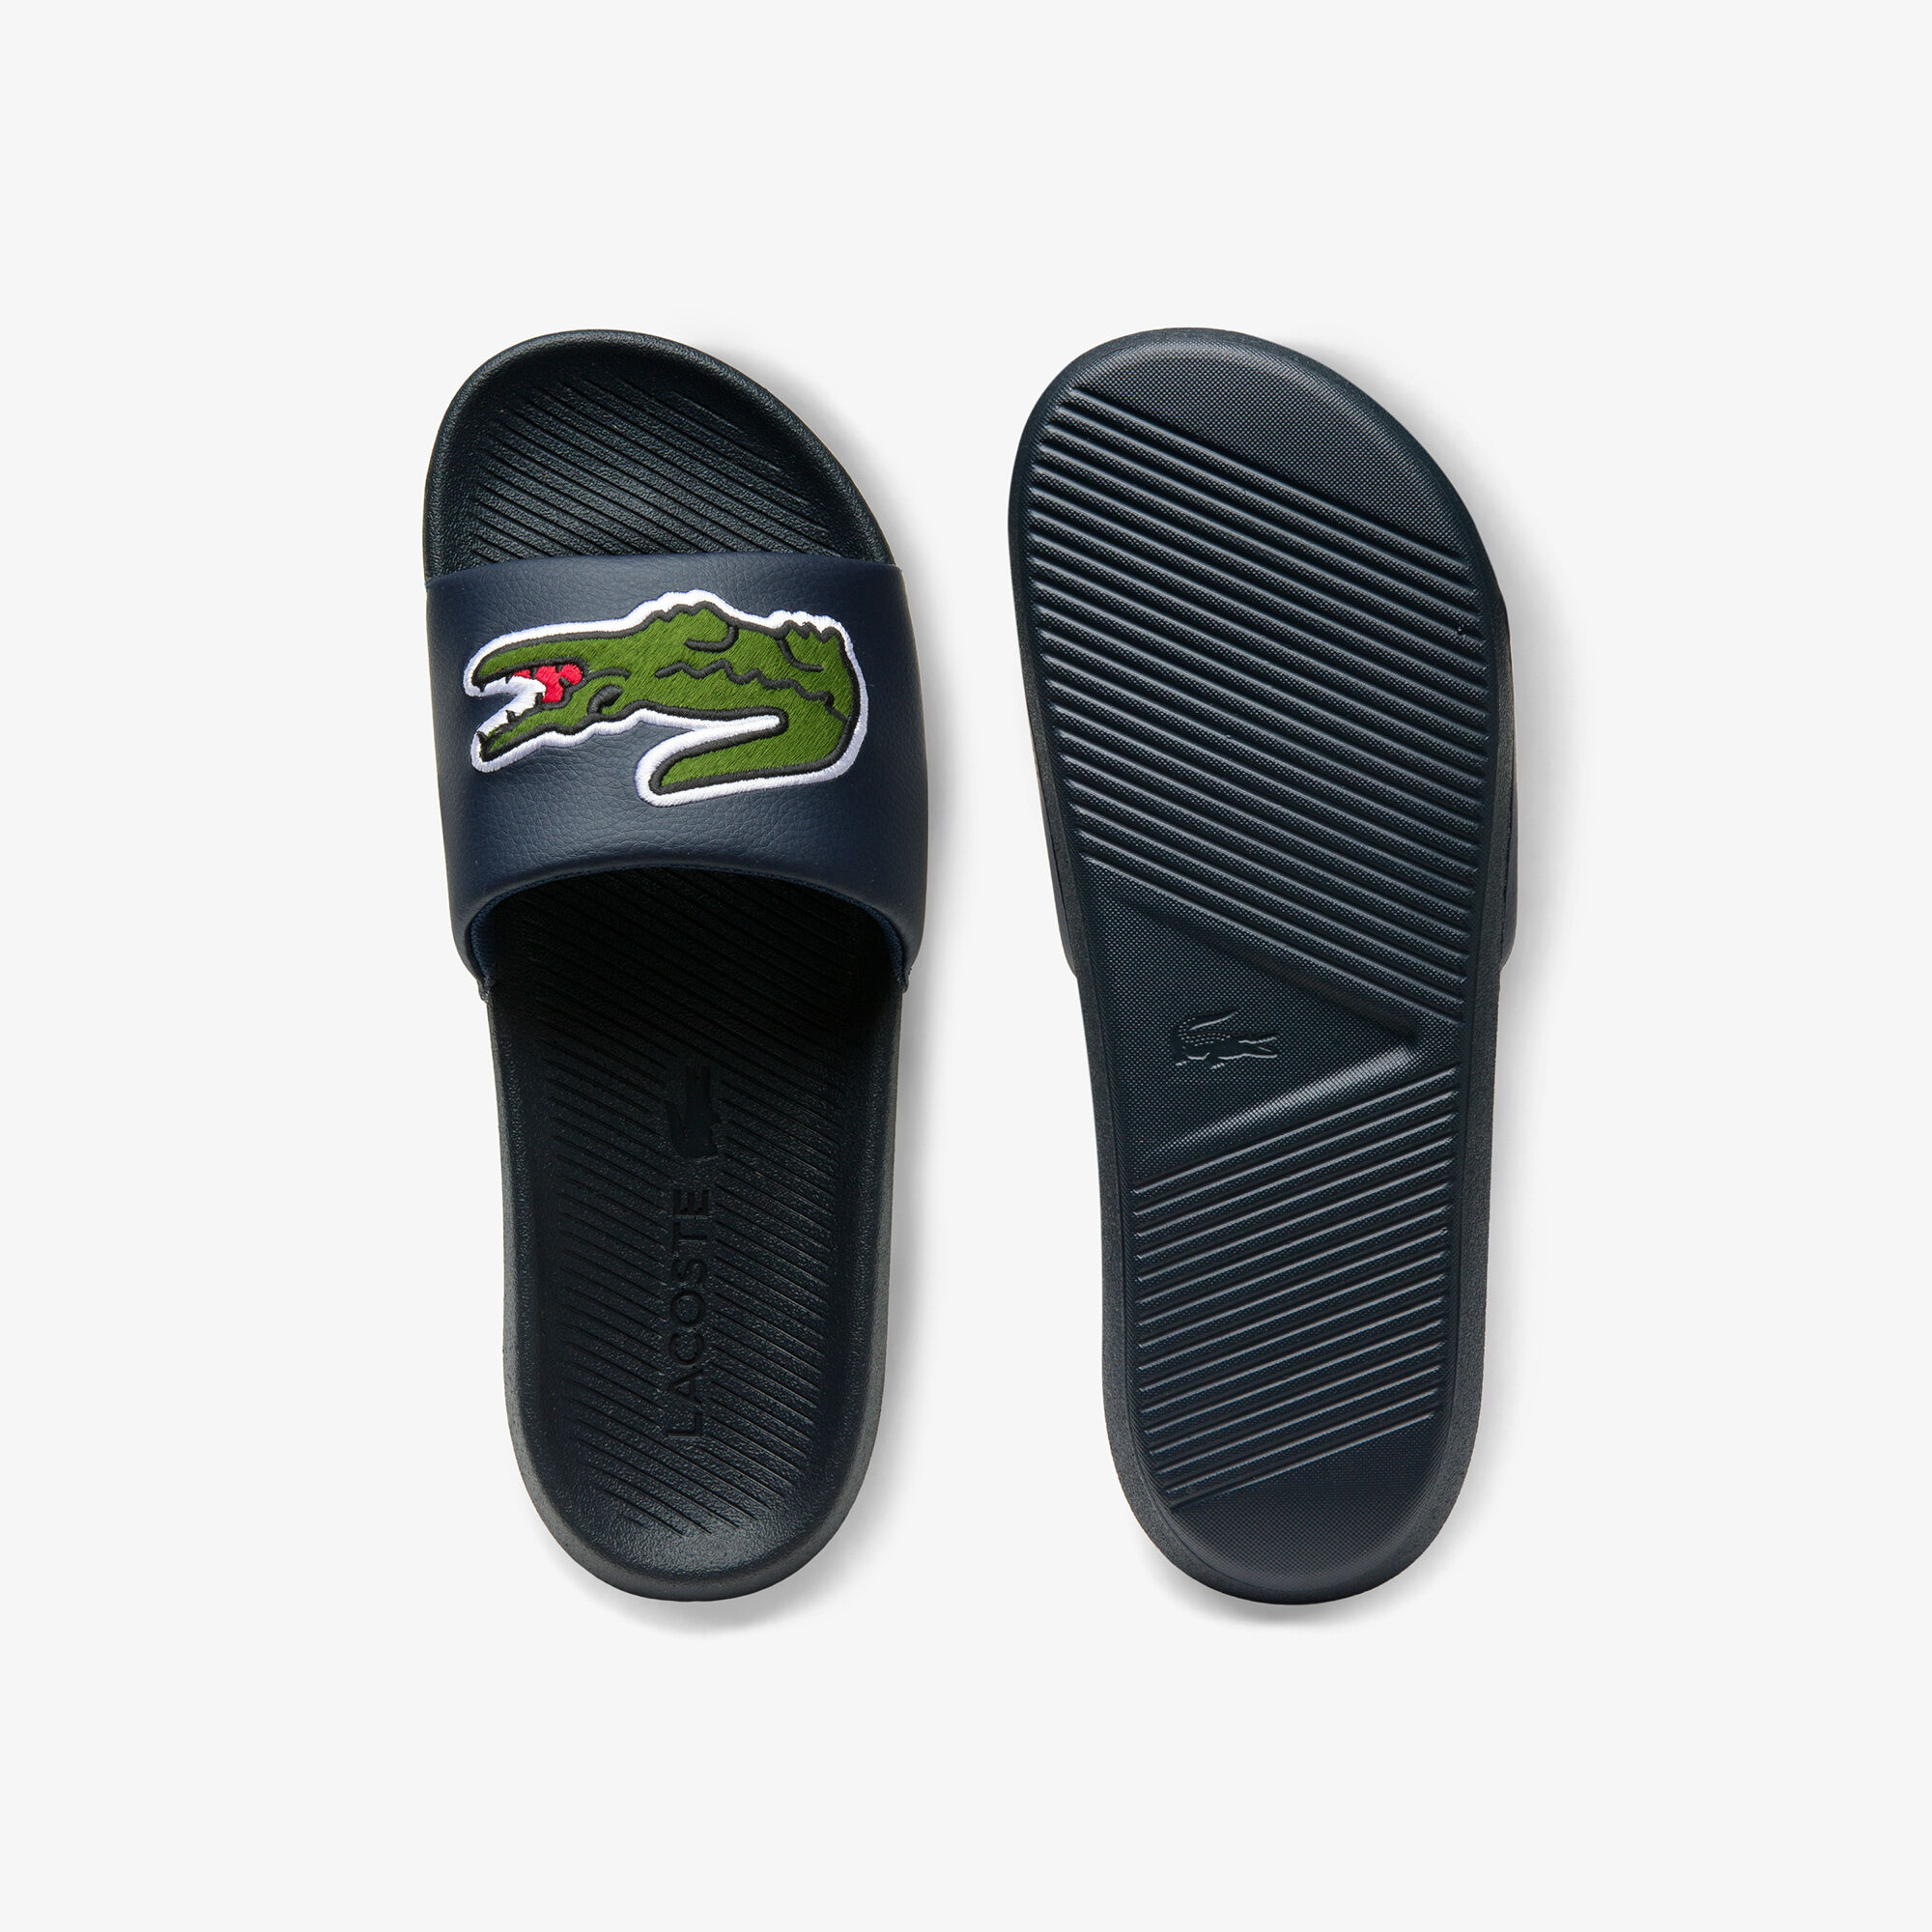 Men's Croco Synthetic and PU Slides